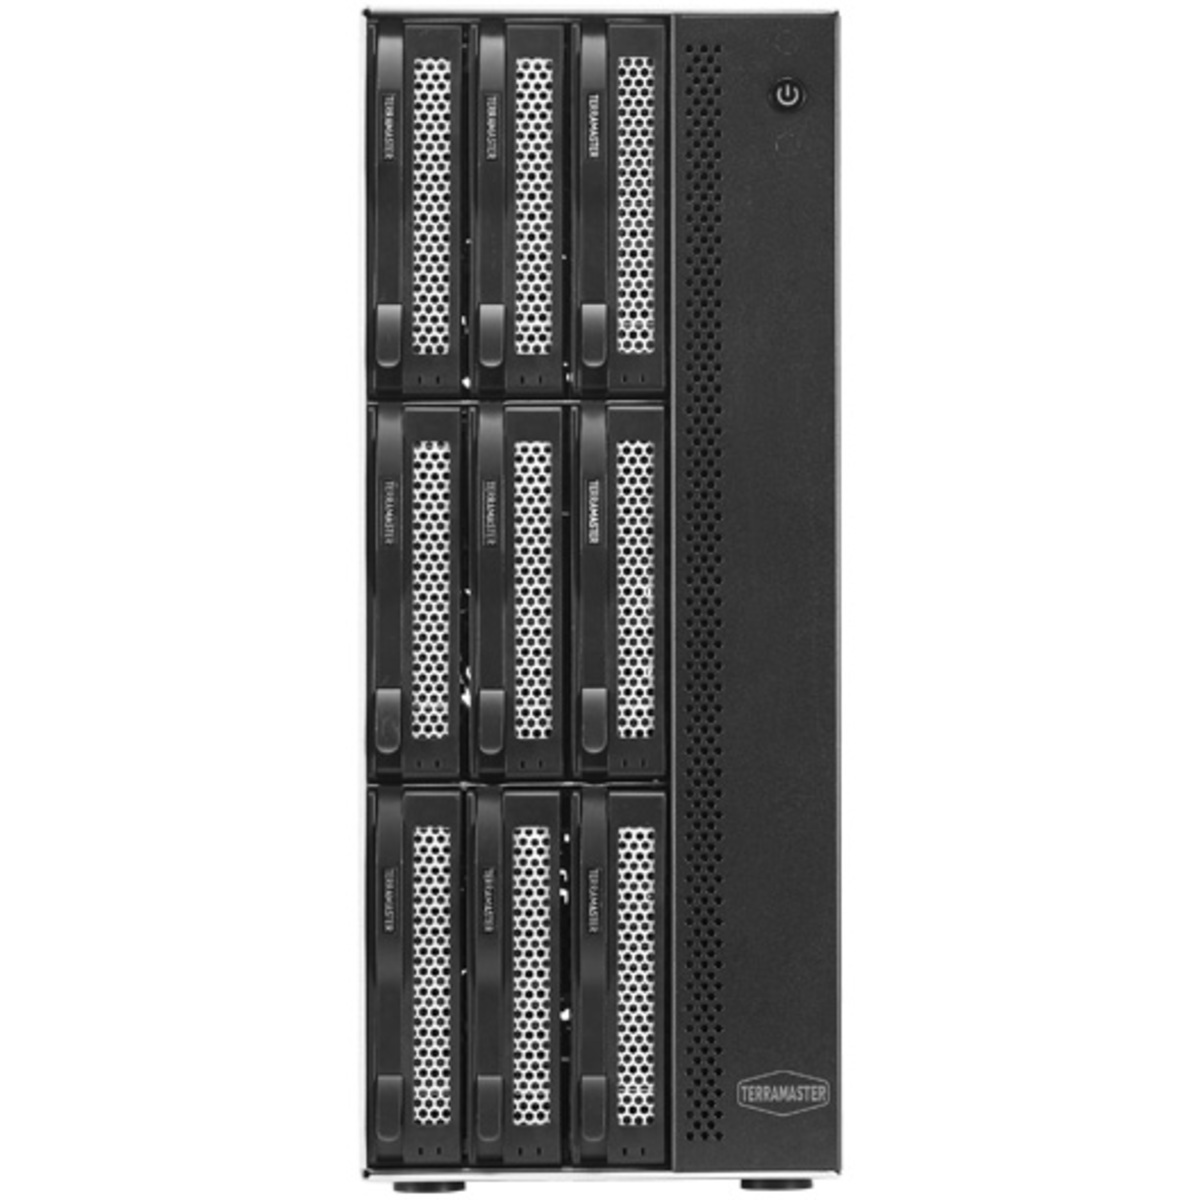 TerraMaster T9-450 12tb 9-Bay Desktop Multimedia / Power User / Business NAS - Network Attached Storage Device 6x2tb Western Digital Gold WD2005FBYZ 3.5 7200rpm SATA 6Gb/s HDD ENTERPRISE Class Drives Installed - Burn-In Tested T9-450